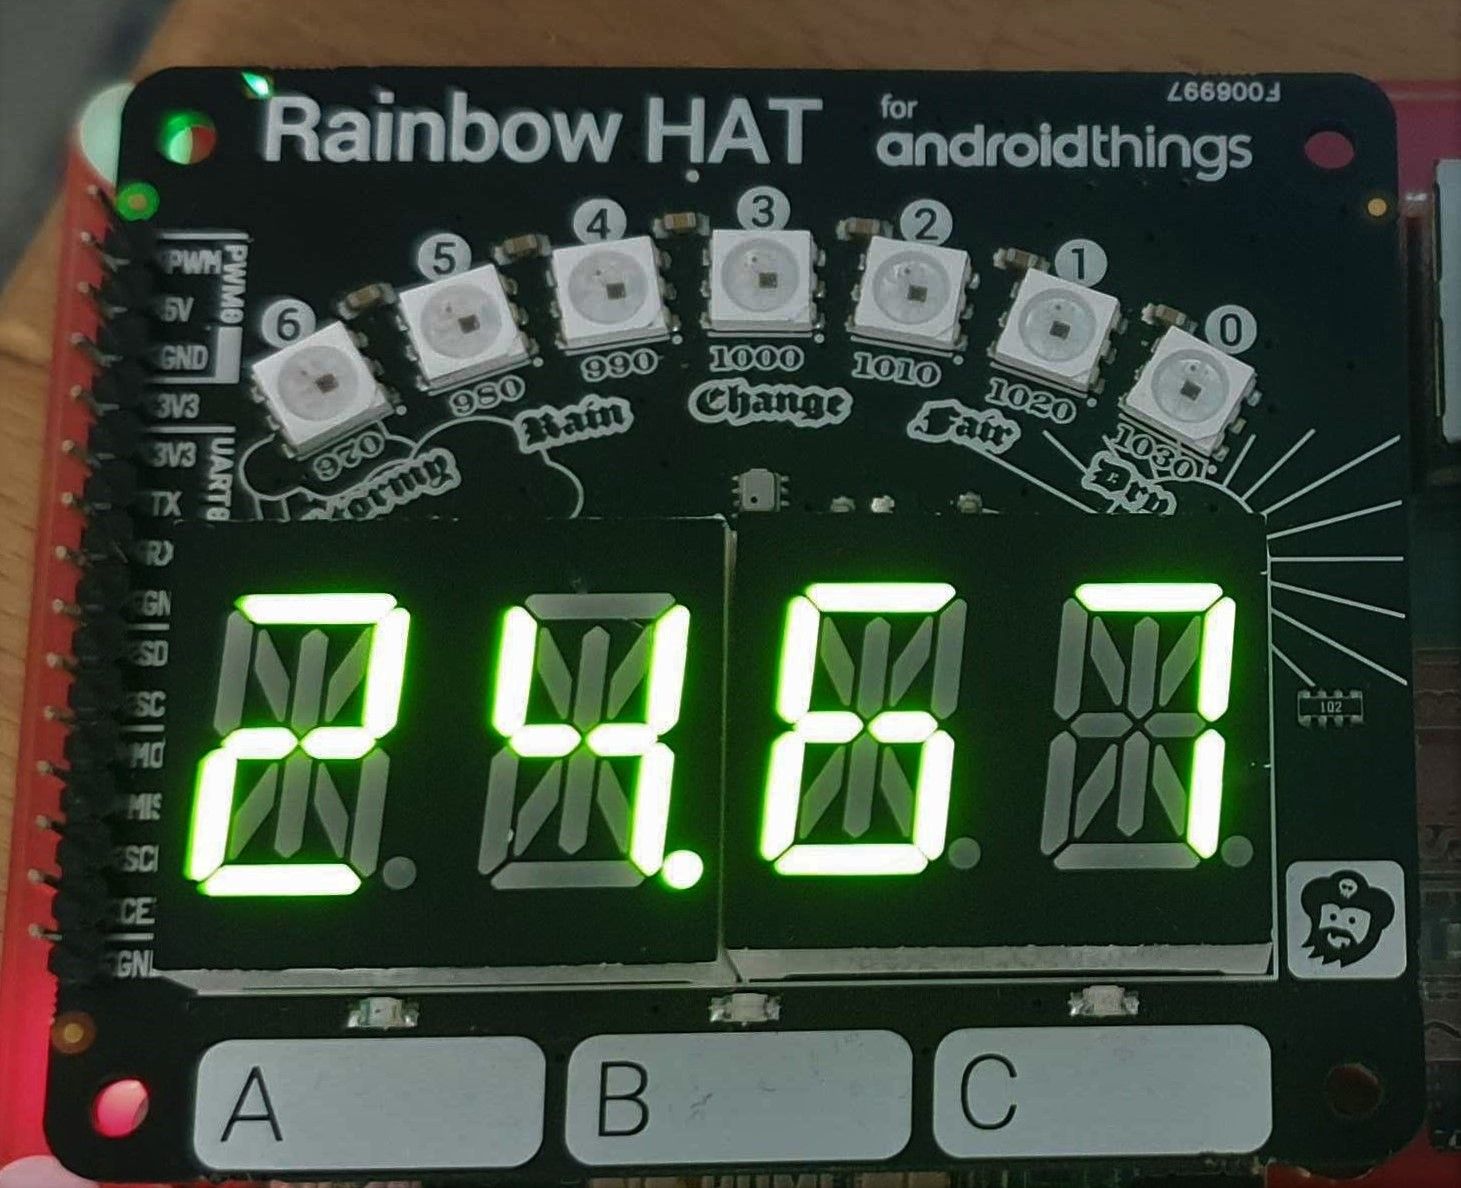 Rainbow HAT 3 - Taking a Temperature Reading